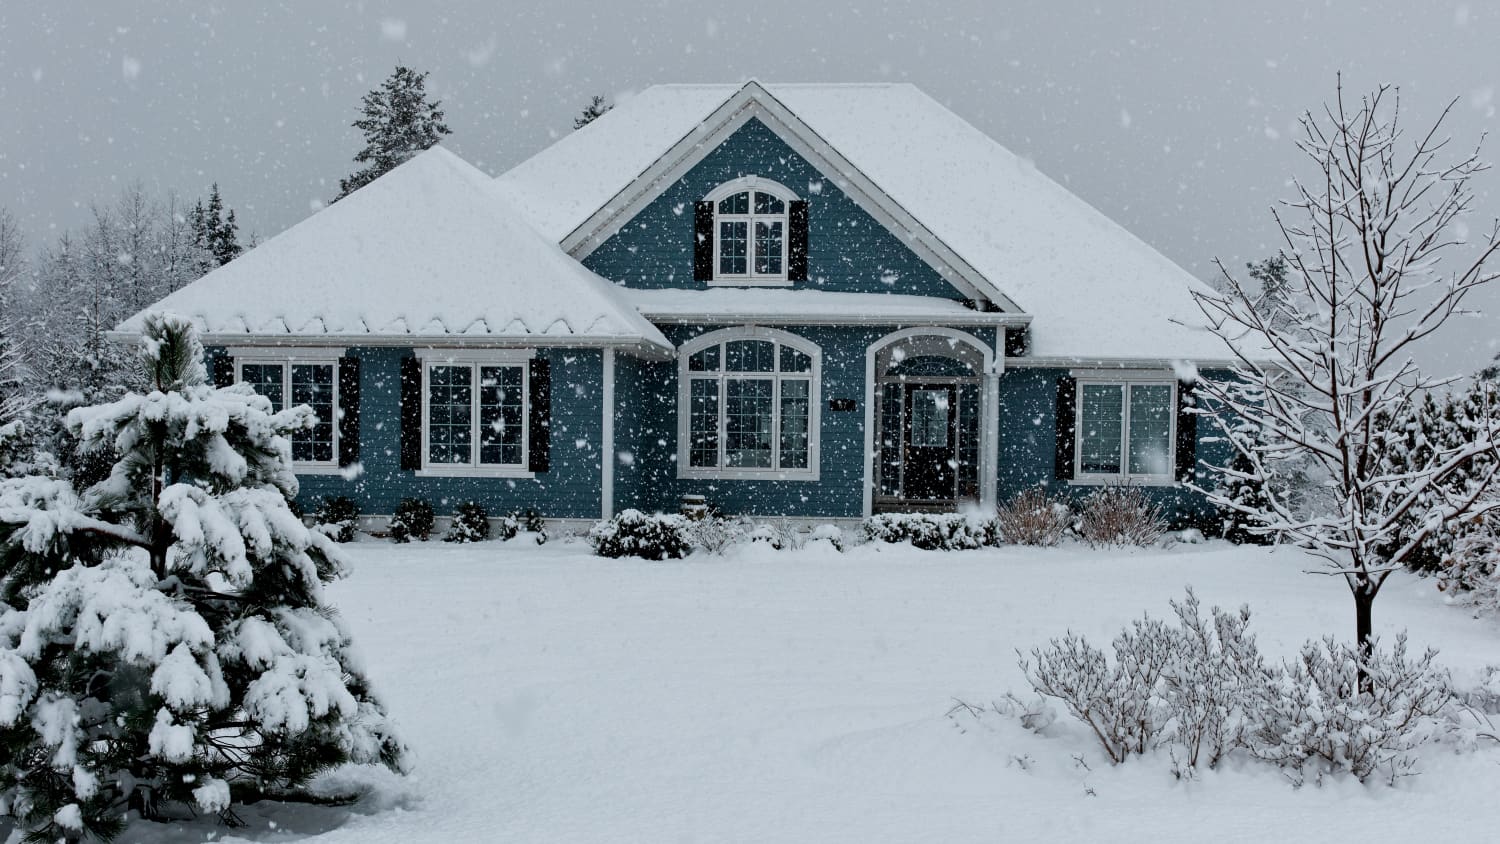 WINTER HOME EMERGENCY KIT CHECKLIST – News and Advice